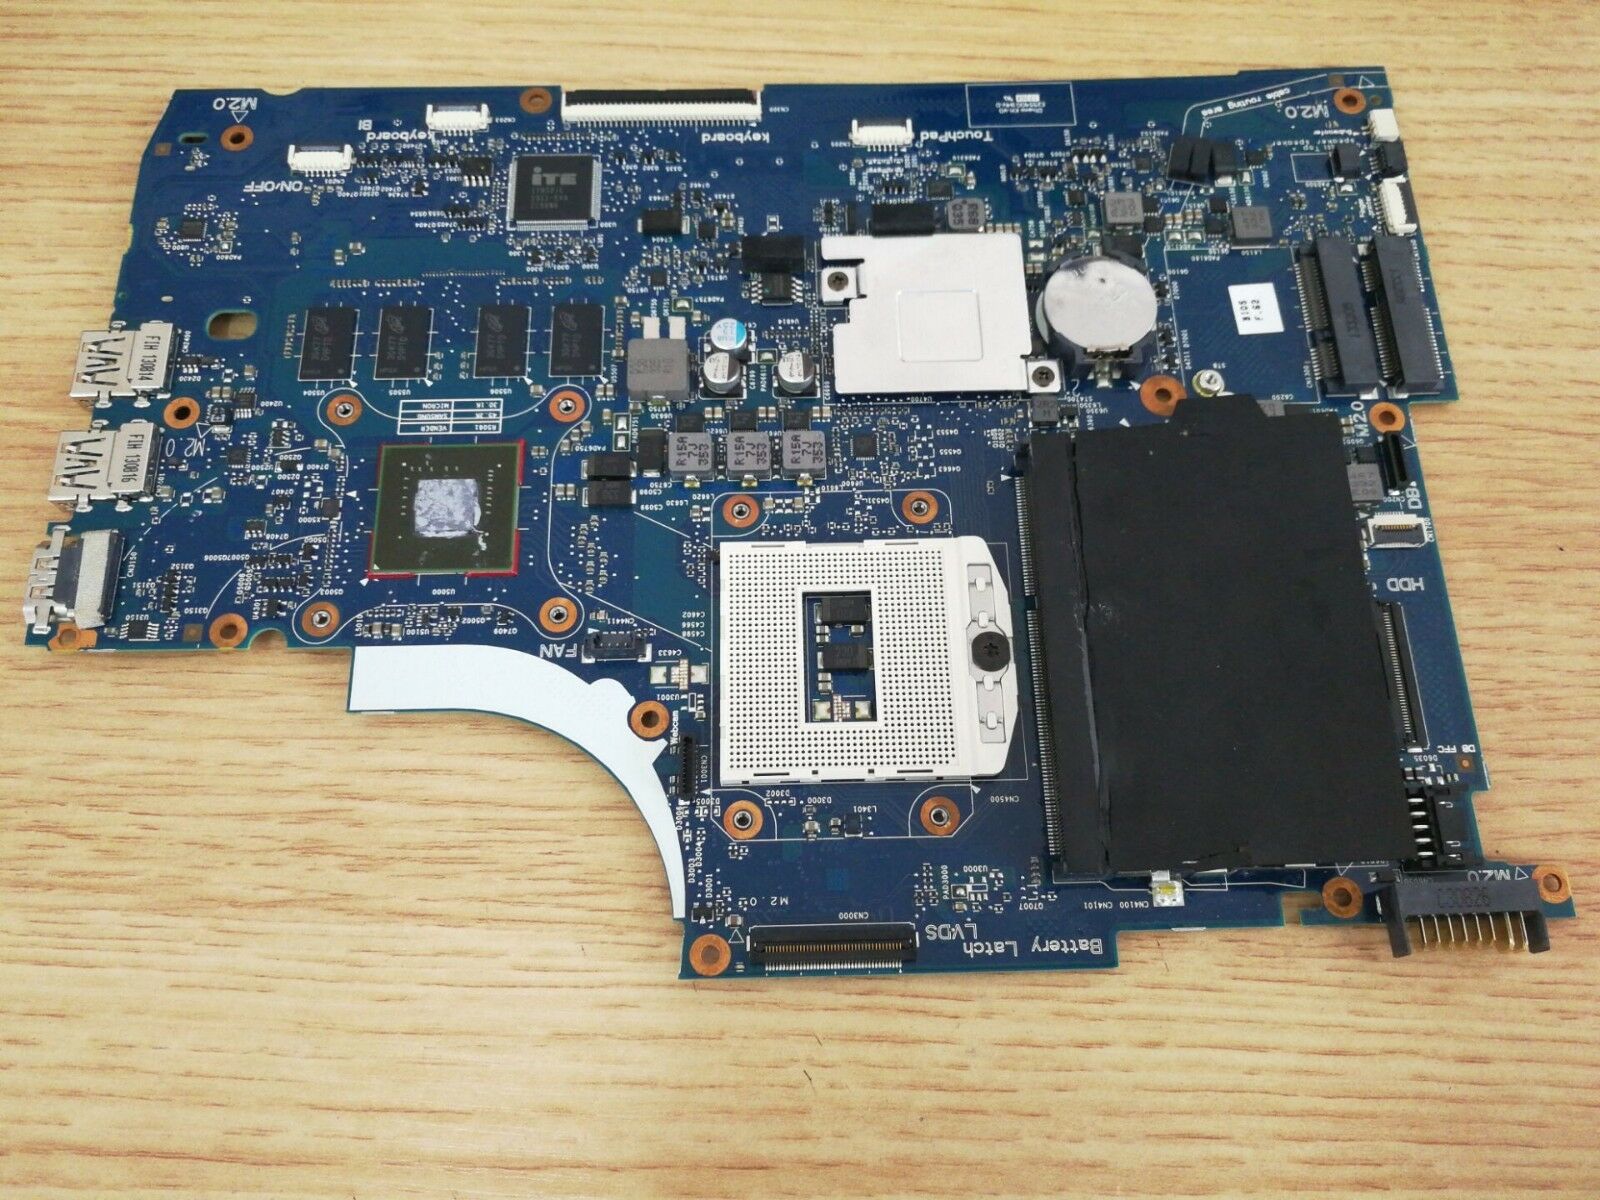 720566-501 motherboard for HP ENVY 15-J laptop 740M/2G 15SBGV2D-6050A2548101 Compatible CPU Brand: Intel Nu